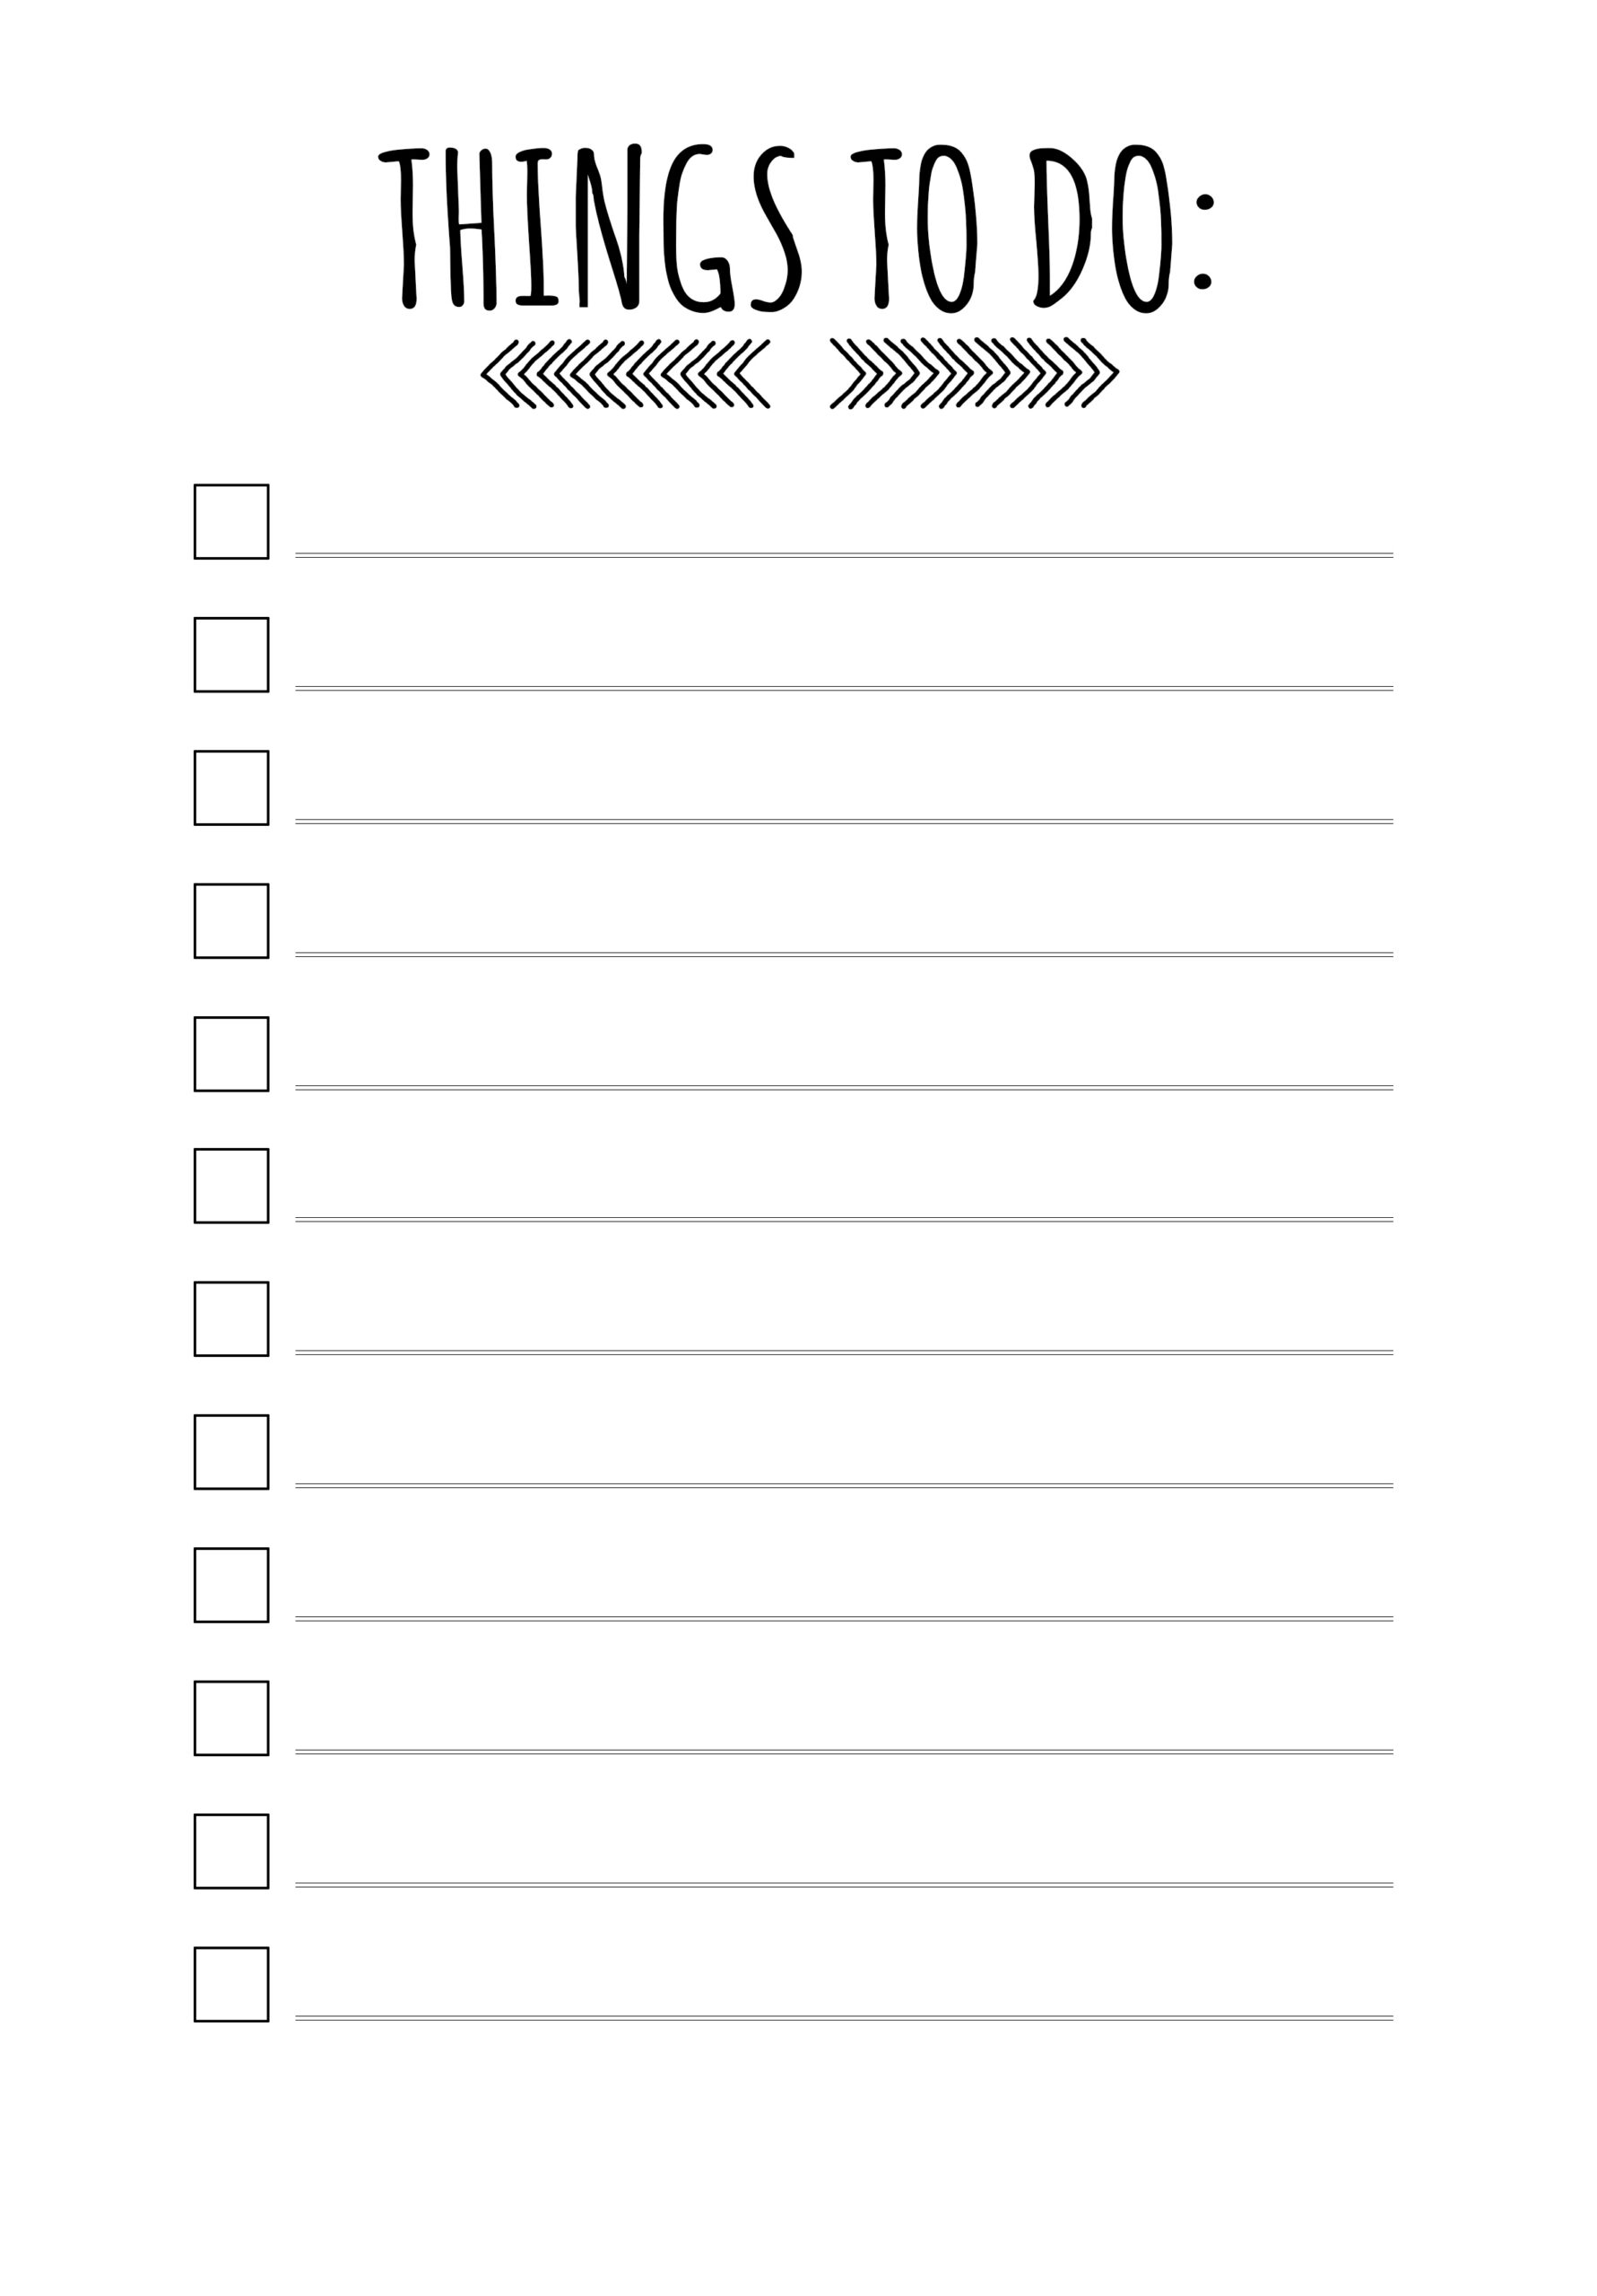 To Do List Print Out Sheet